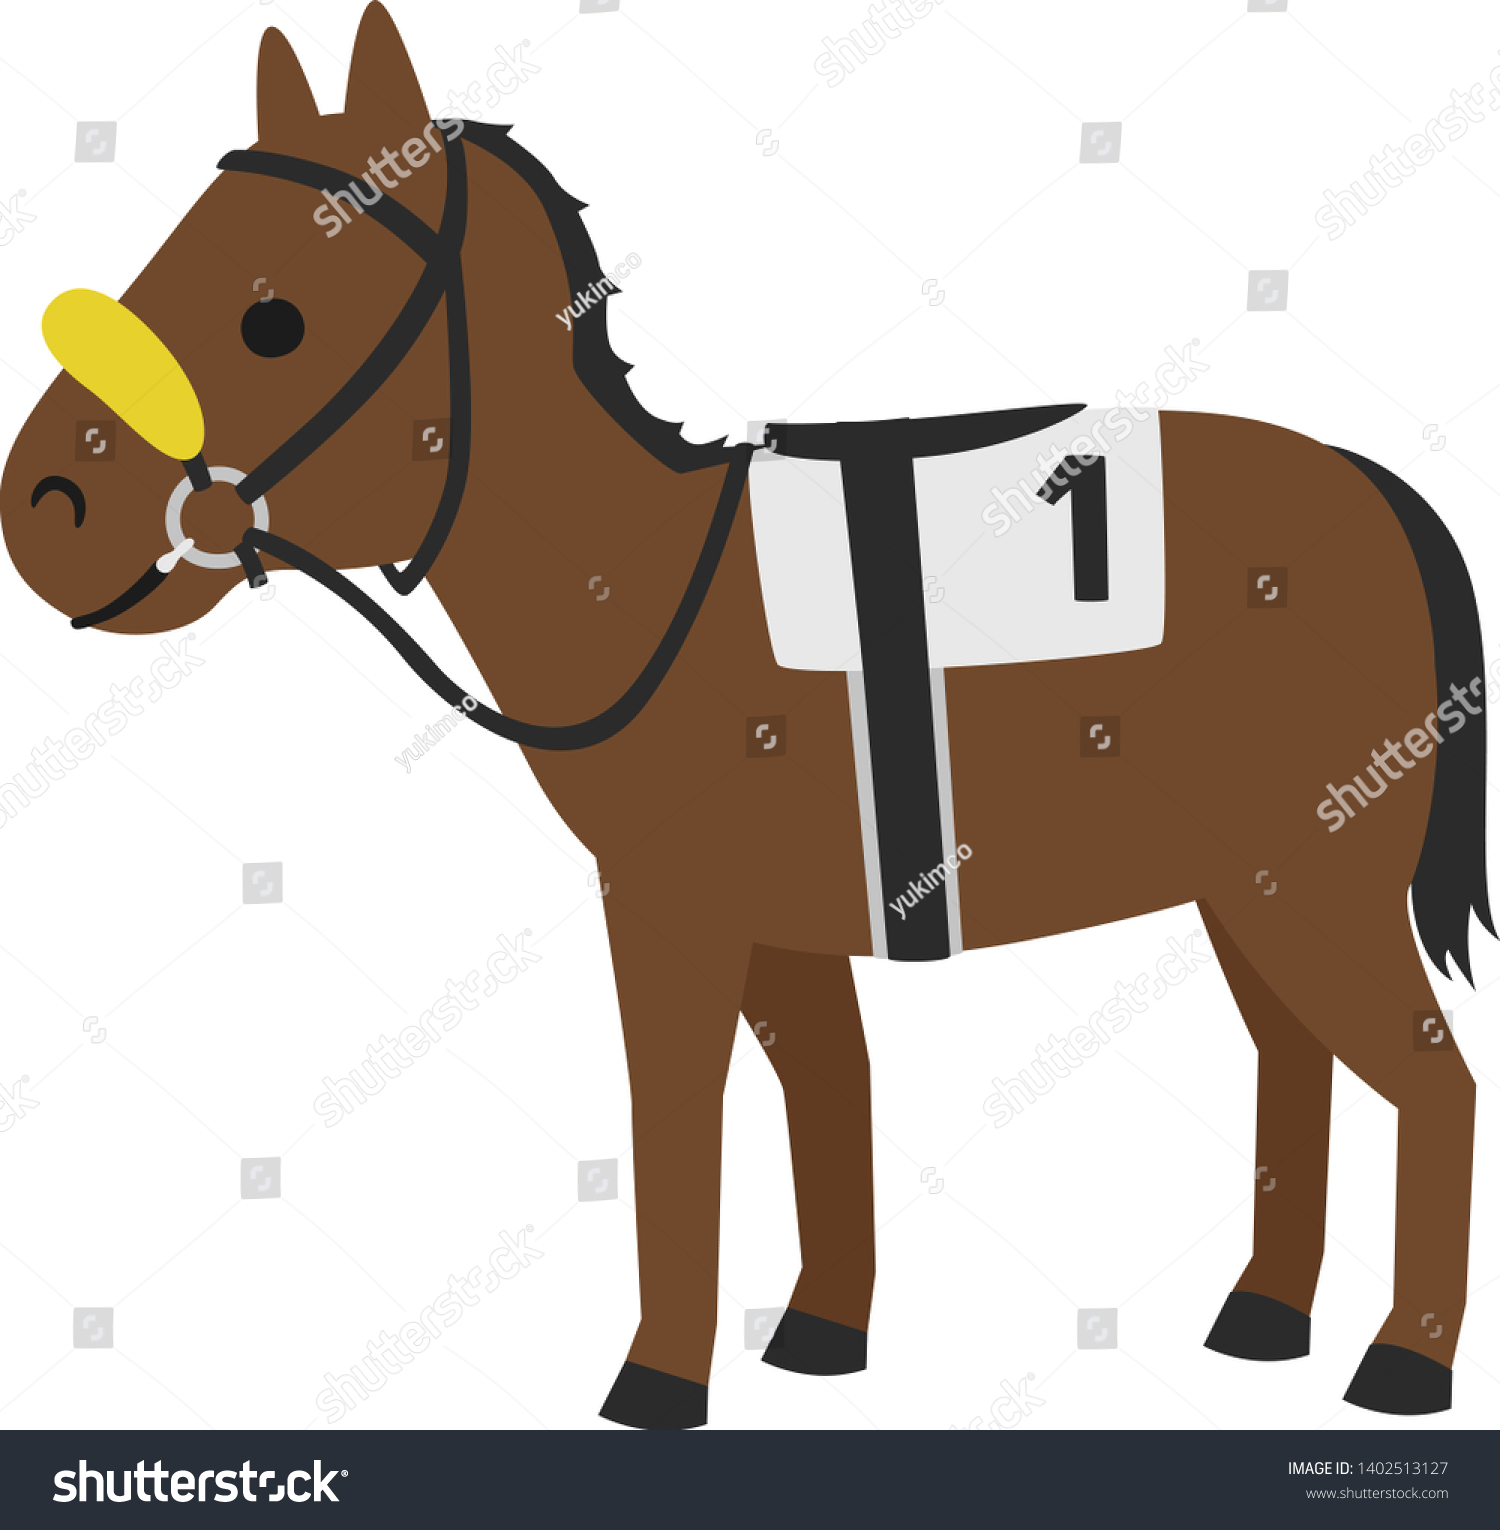 SVG of Horse racing illustration.This is a racehorse with a horse gear. A shadow roll is a harness that obscures the underside and focuses your attention forward. svg